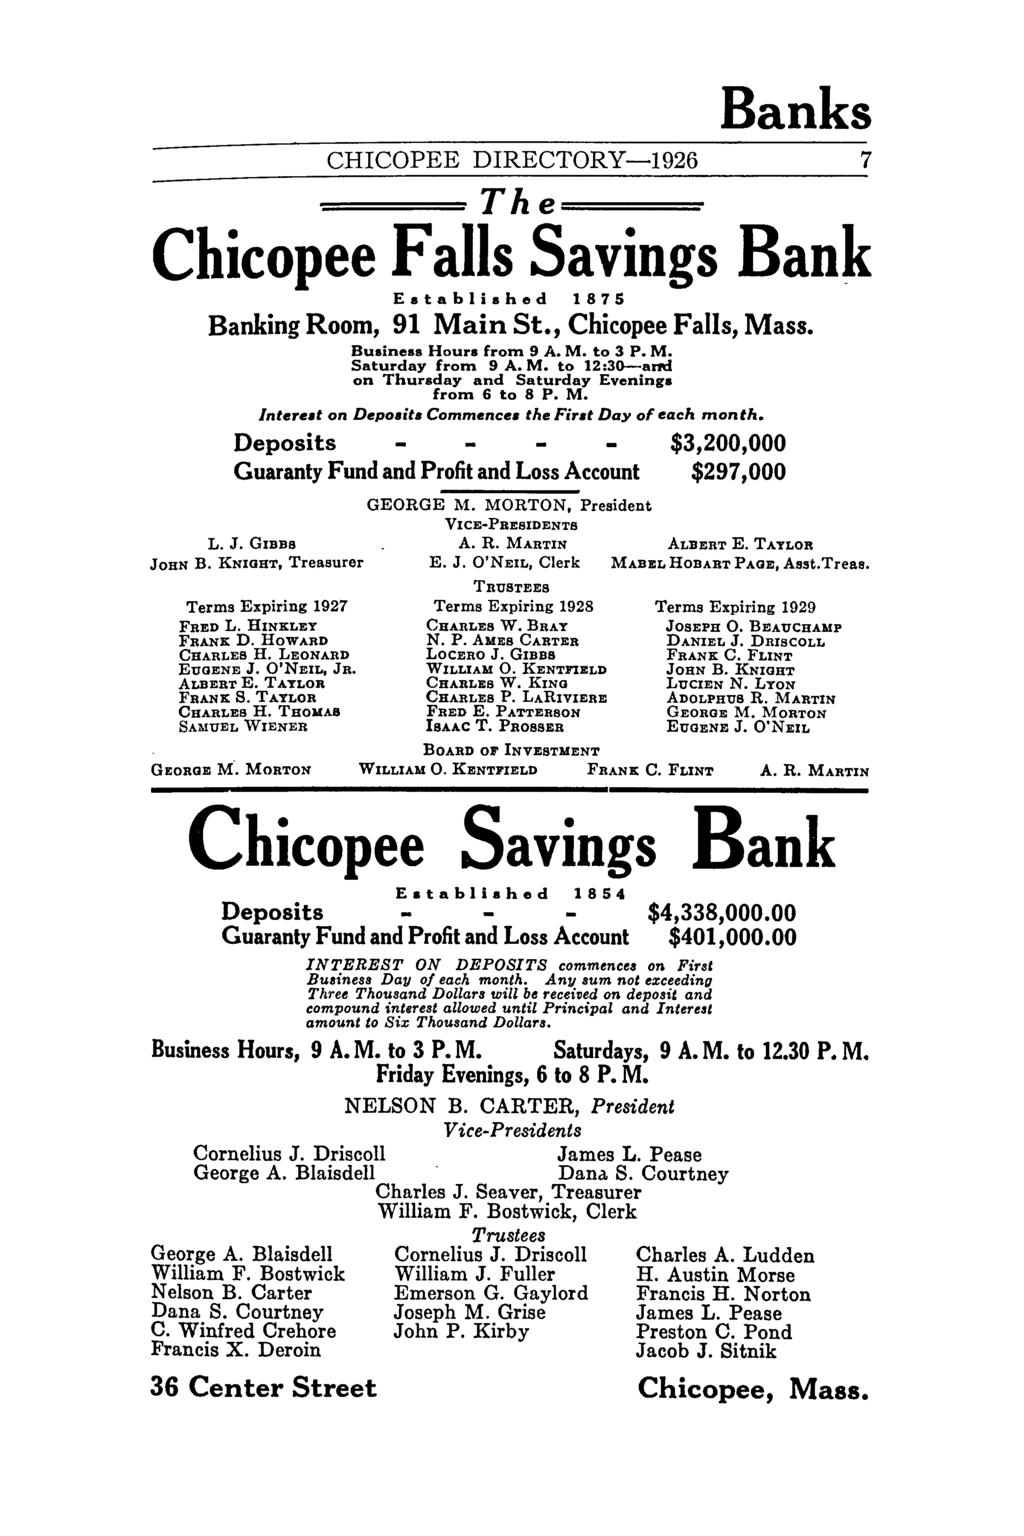 Banks CHICOPEE DIRECTORY-1926 7 The===- Chicopee Sings Bank Established 1875 Banking Room, 91 Main St., Chicopee, Mass. Business Hours from 9 A. M. to 3 P. M. Saturday from 9 A. M. to 12:3c>--and on Thursday and Saturday Evenings from 6 to 8 P.